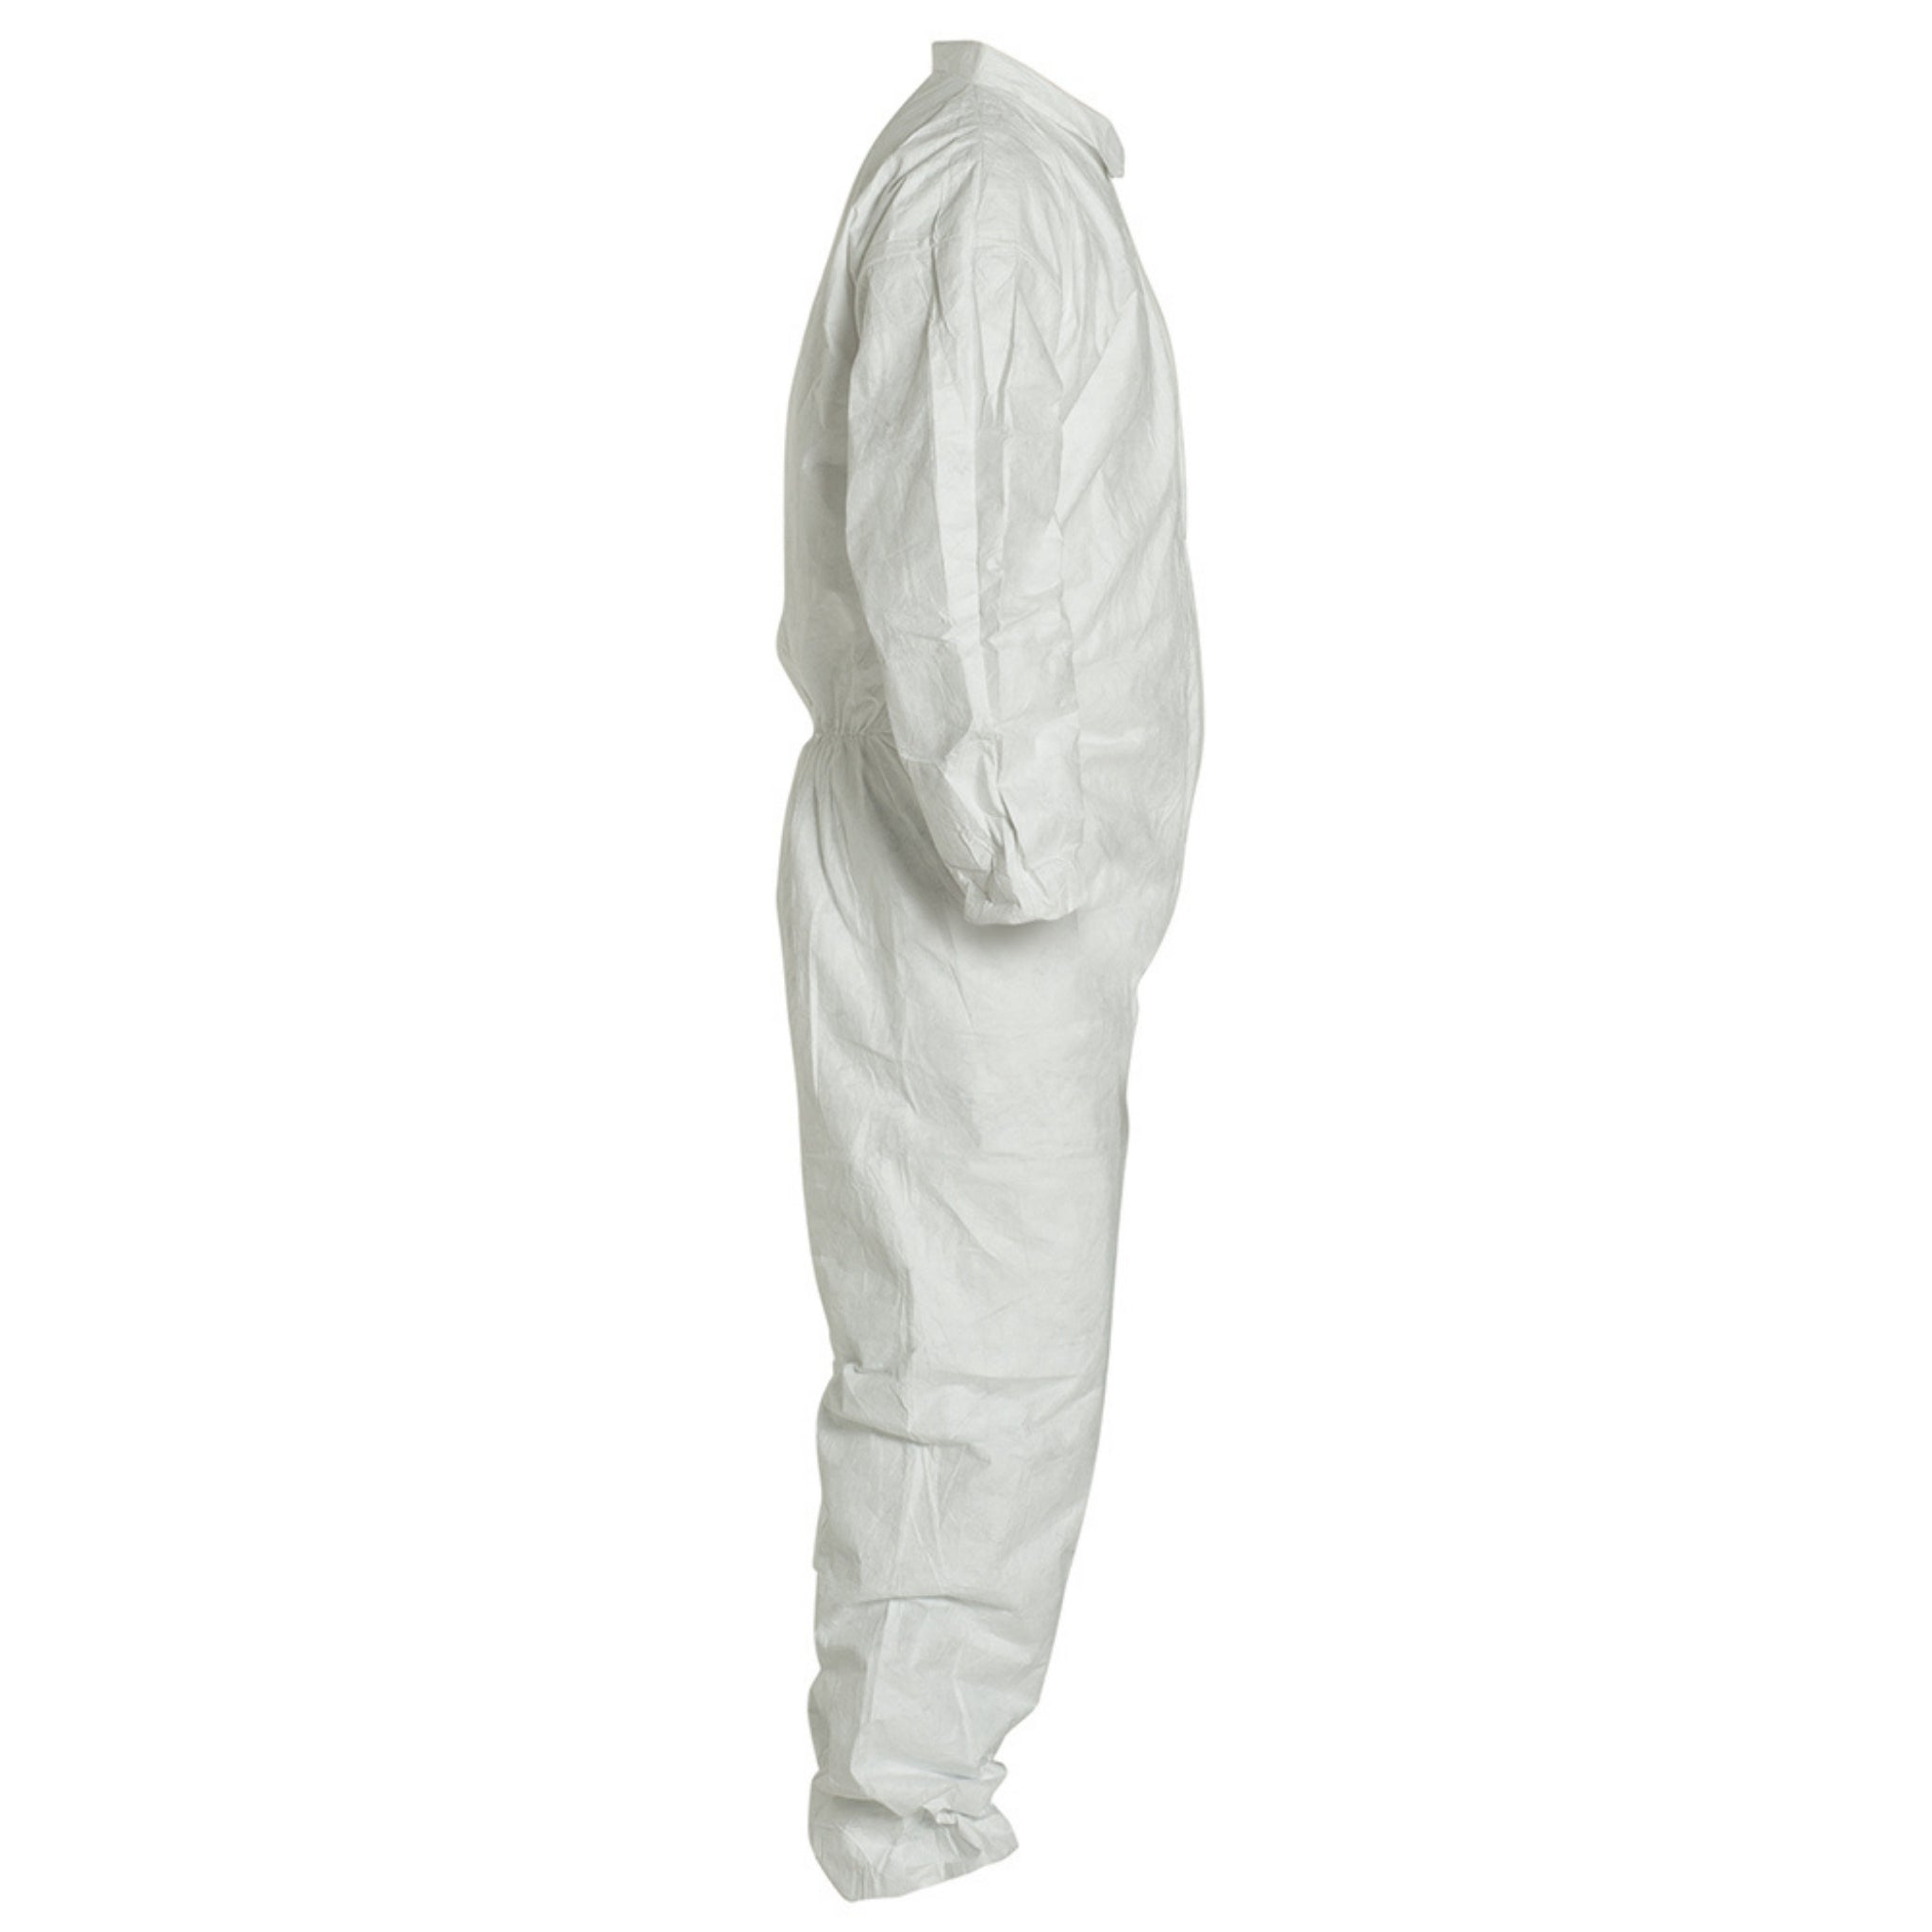 DuPont TY125S- 1 Suit: Tyvek 400  Disposable Protective Coverall, White